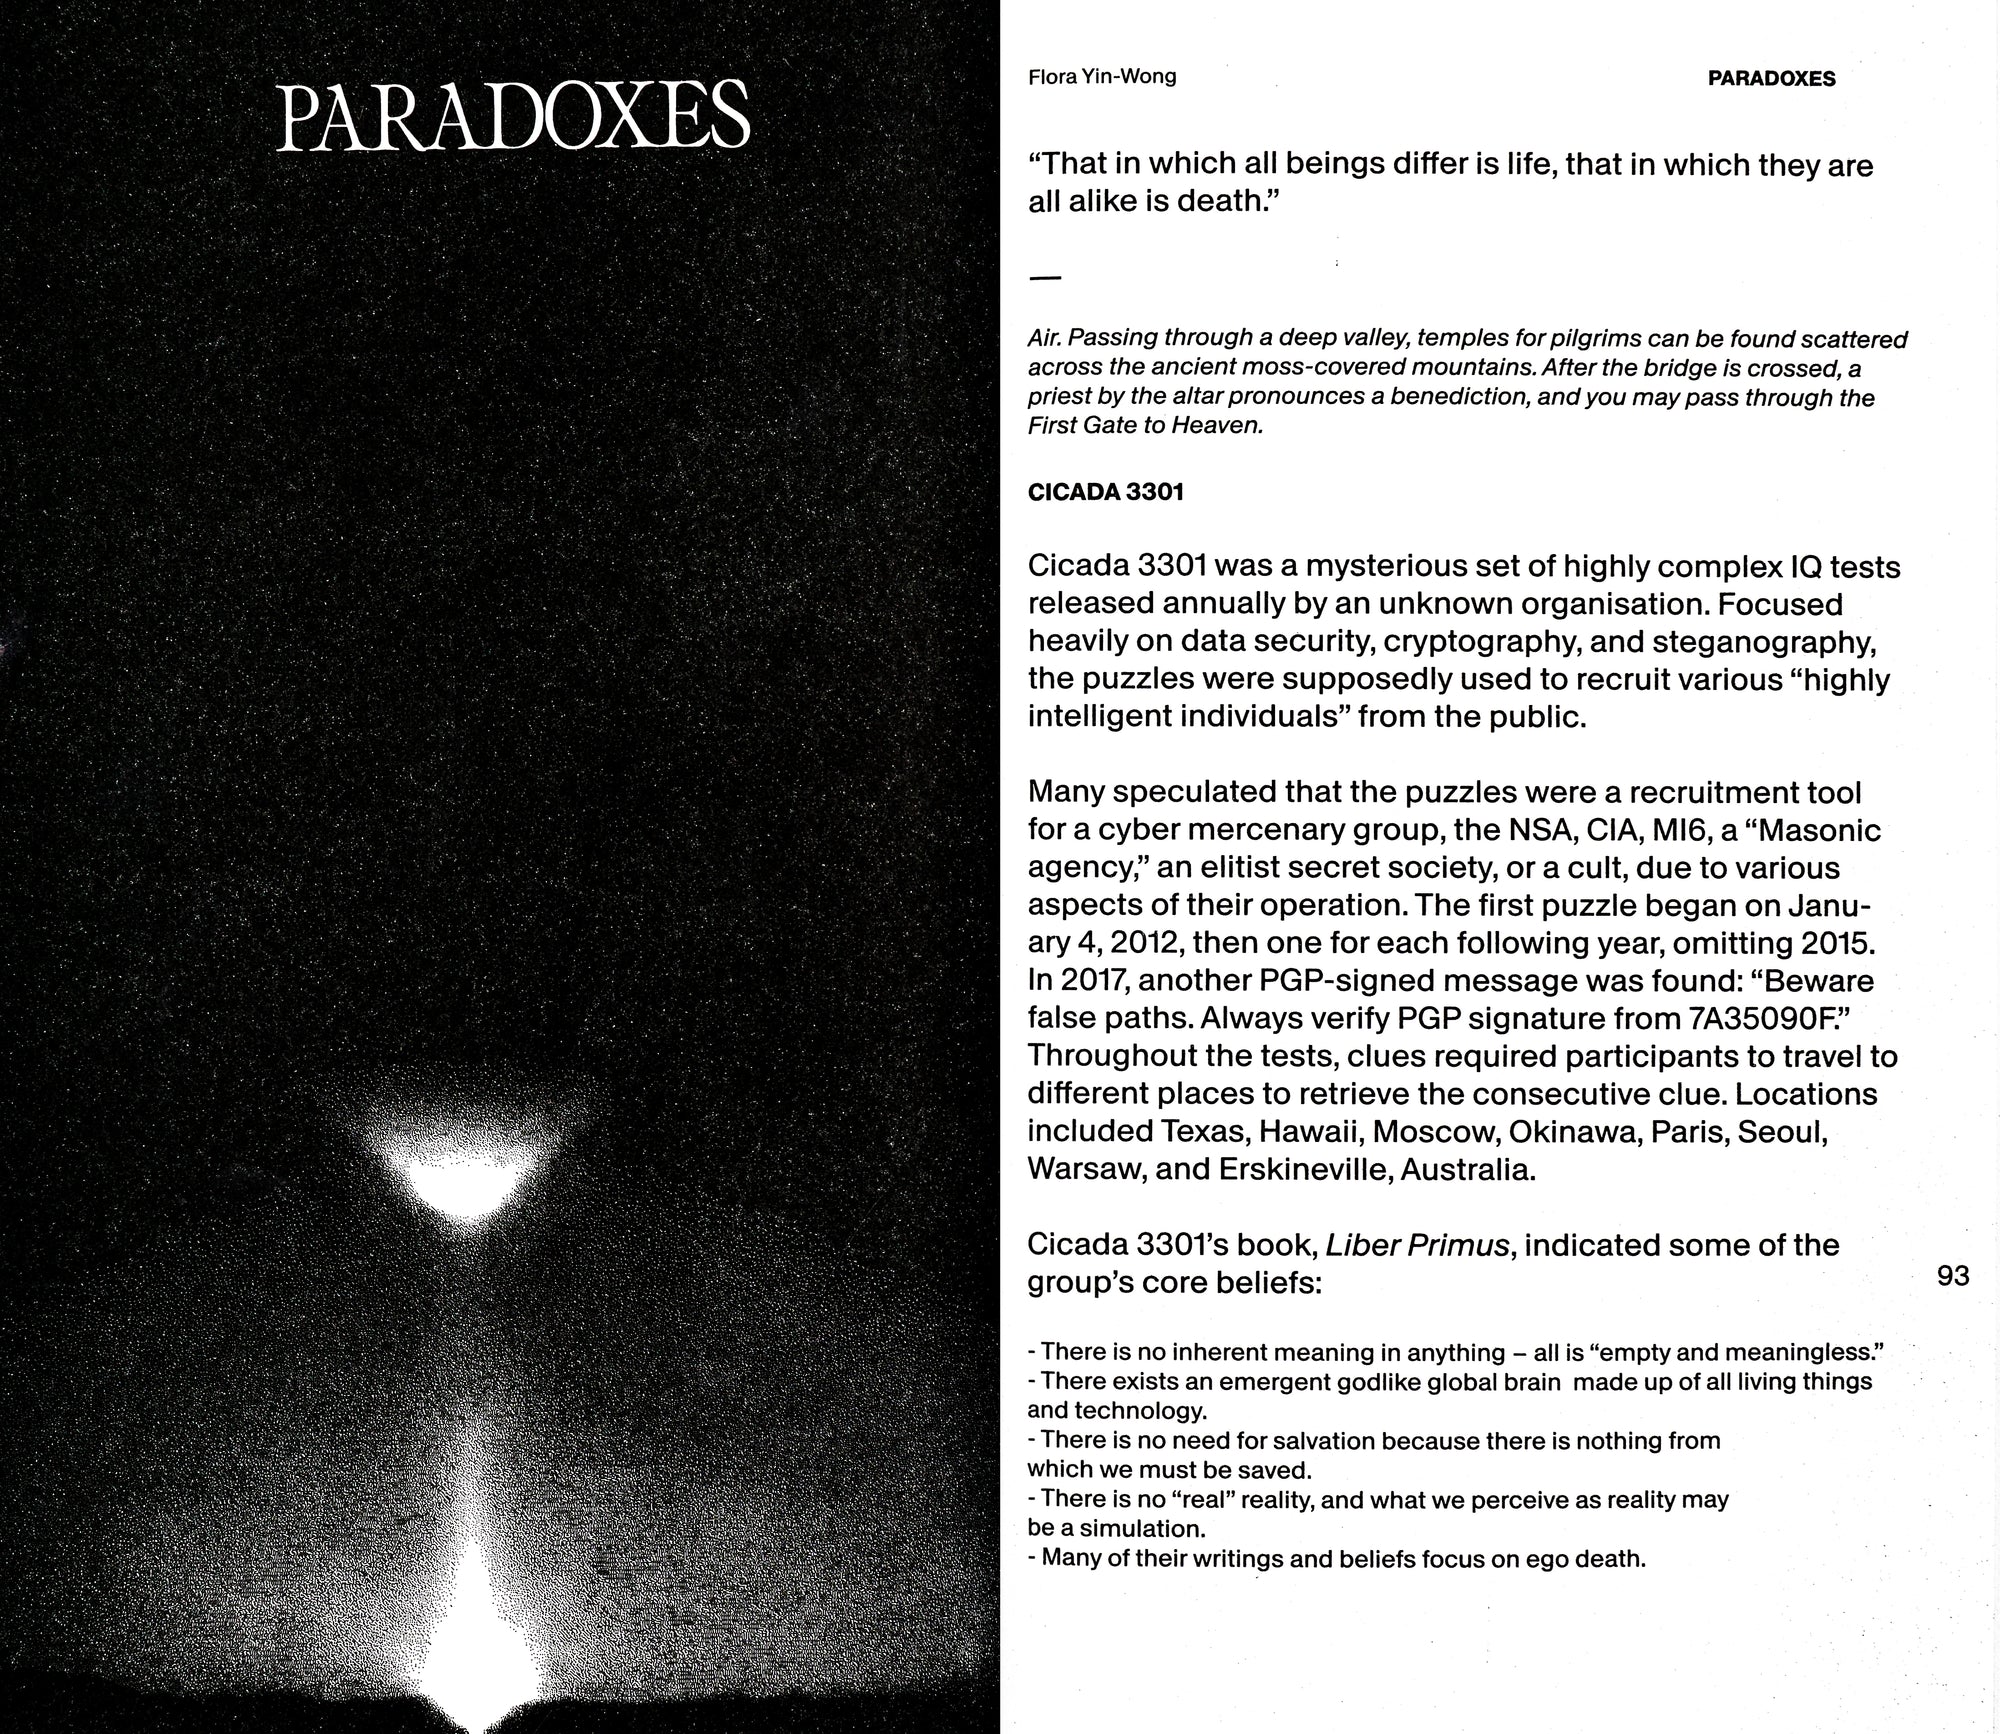 Book spread in black and white. The left page has the title Paradoxes written in white serif writing and a grainy image of abstract light cones below it on the lower third of the page. The right page is monochrome white with black sans serif writing. 